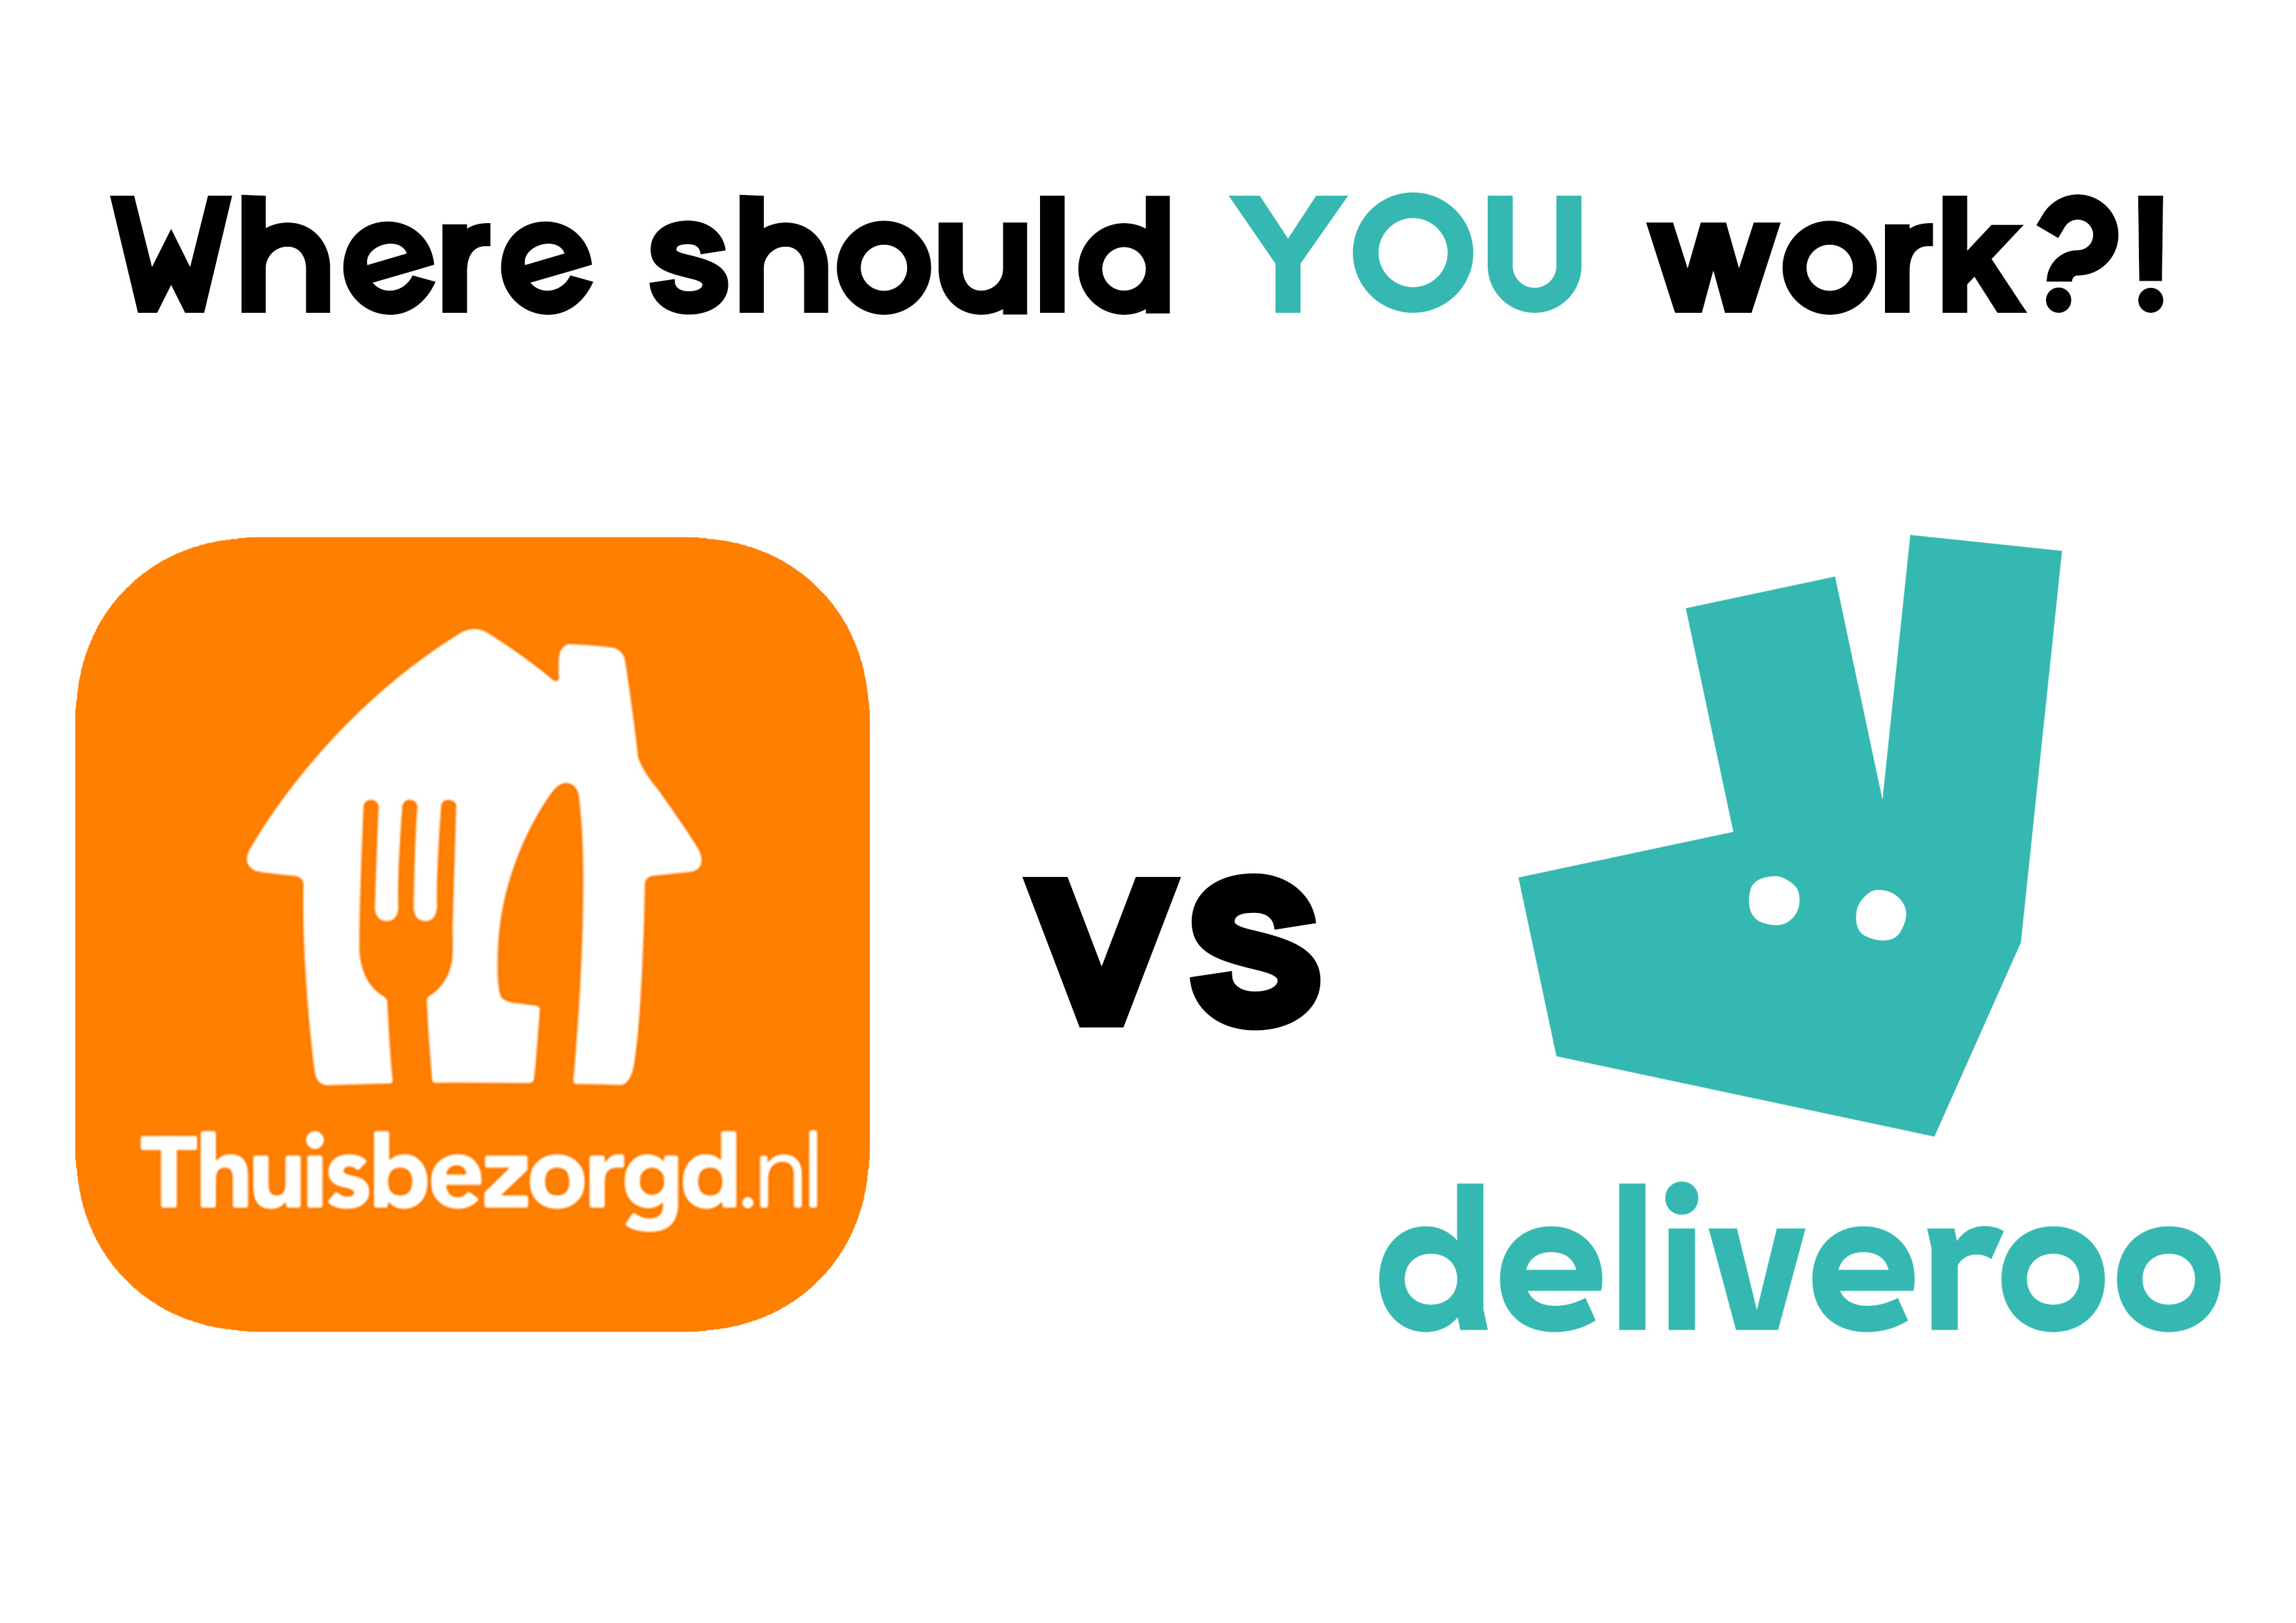 Deliveroo vs Thuisbezorgd: Pros & Cons Of Working As A Takeaway Rider